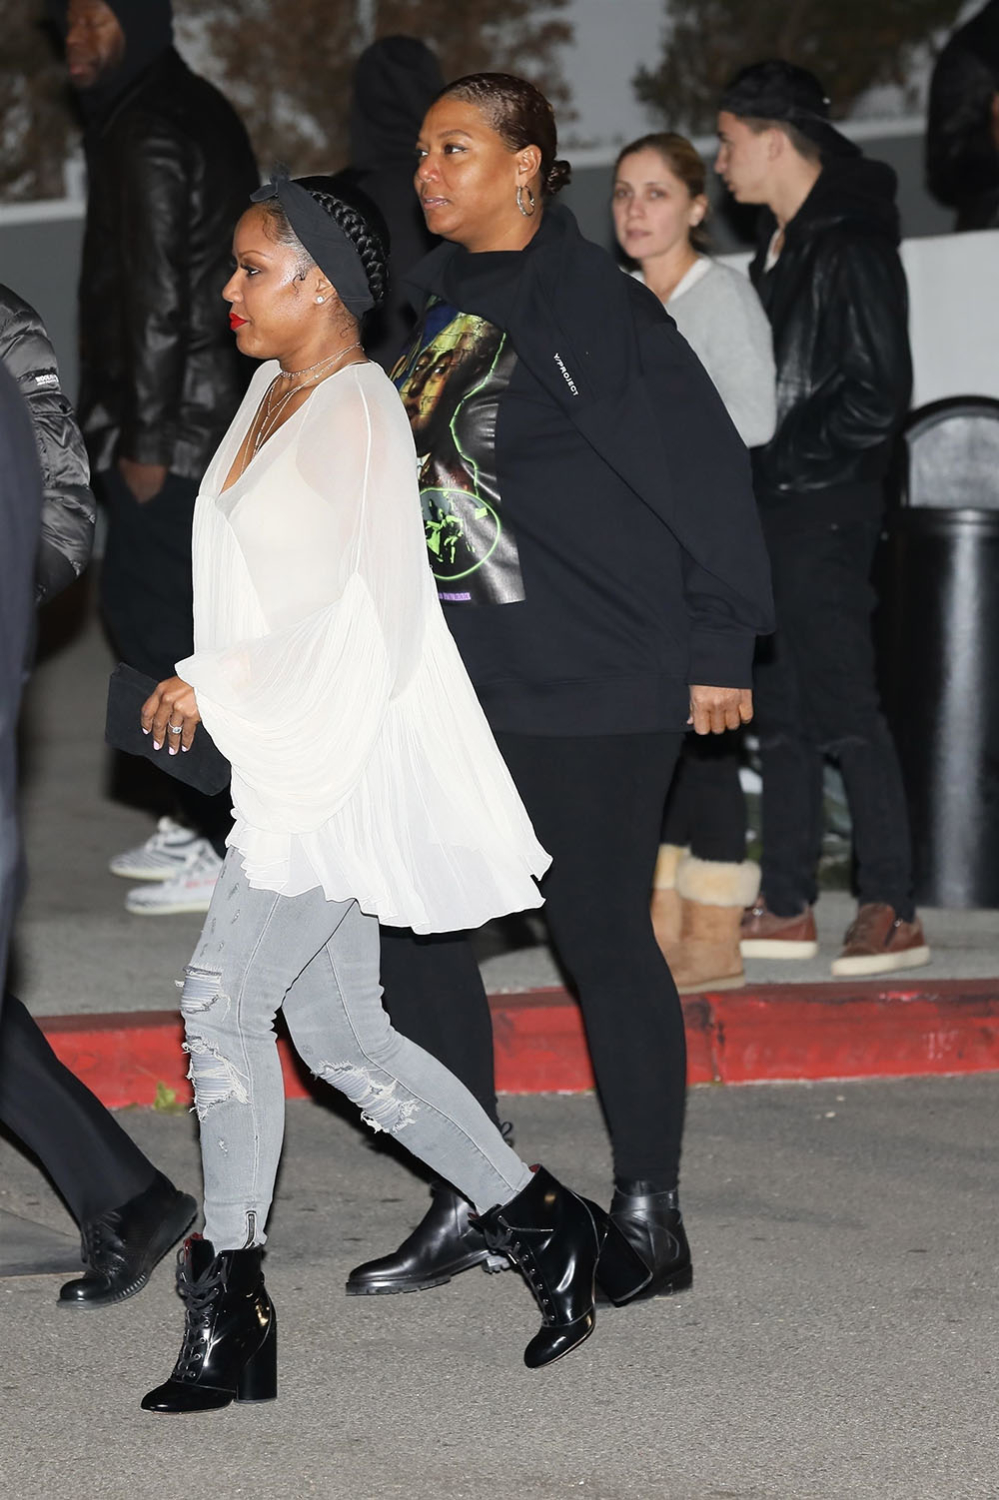 Queen Latifah and girlfriend Eboni attend Jay-Z’s concert at The Forum ...